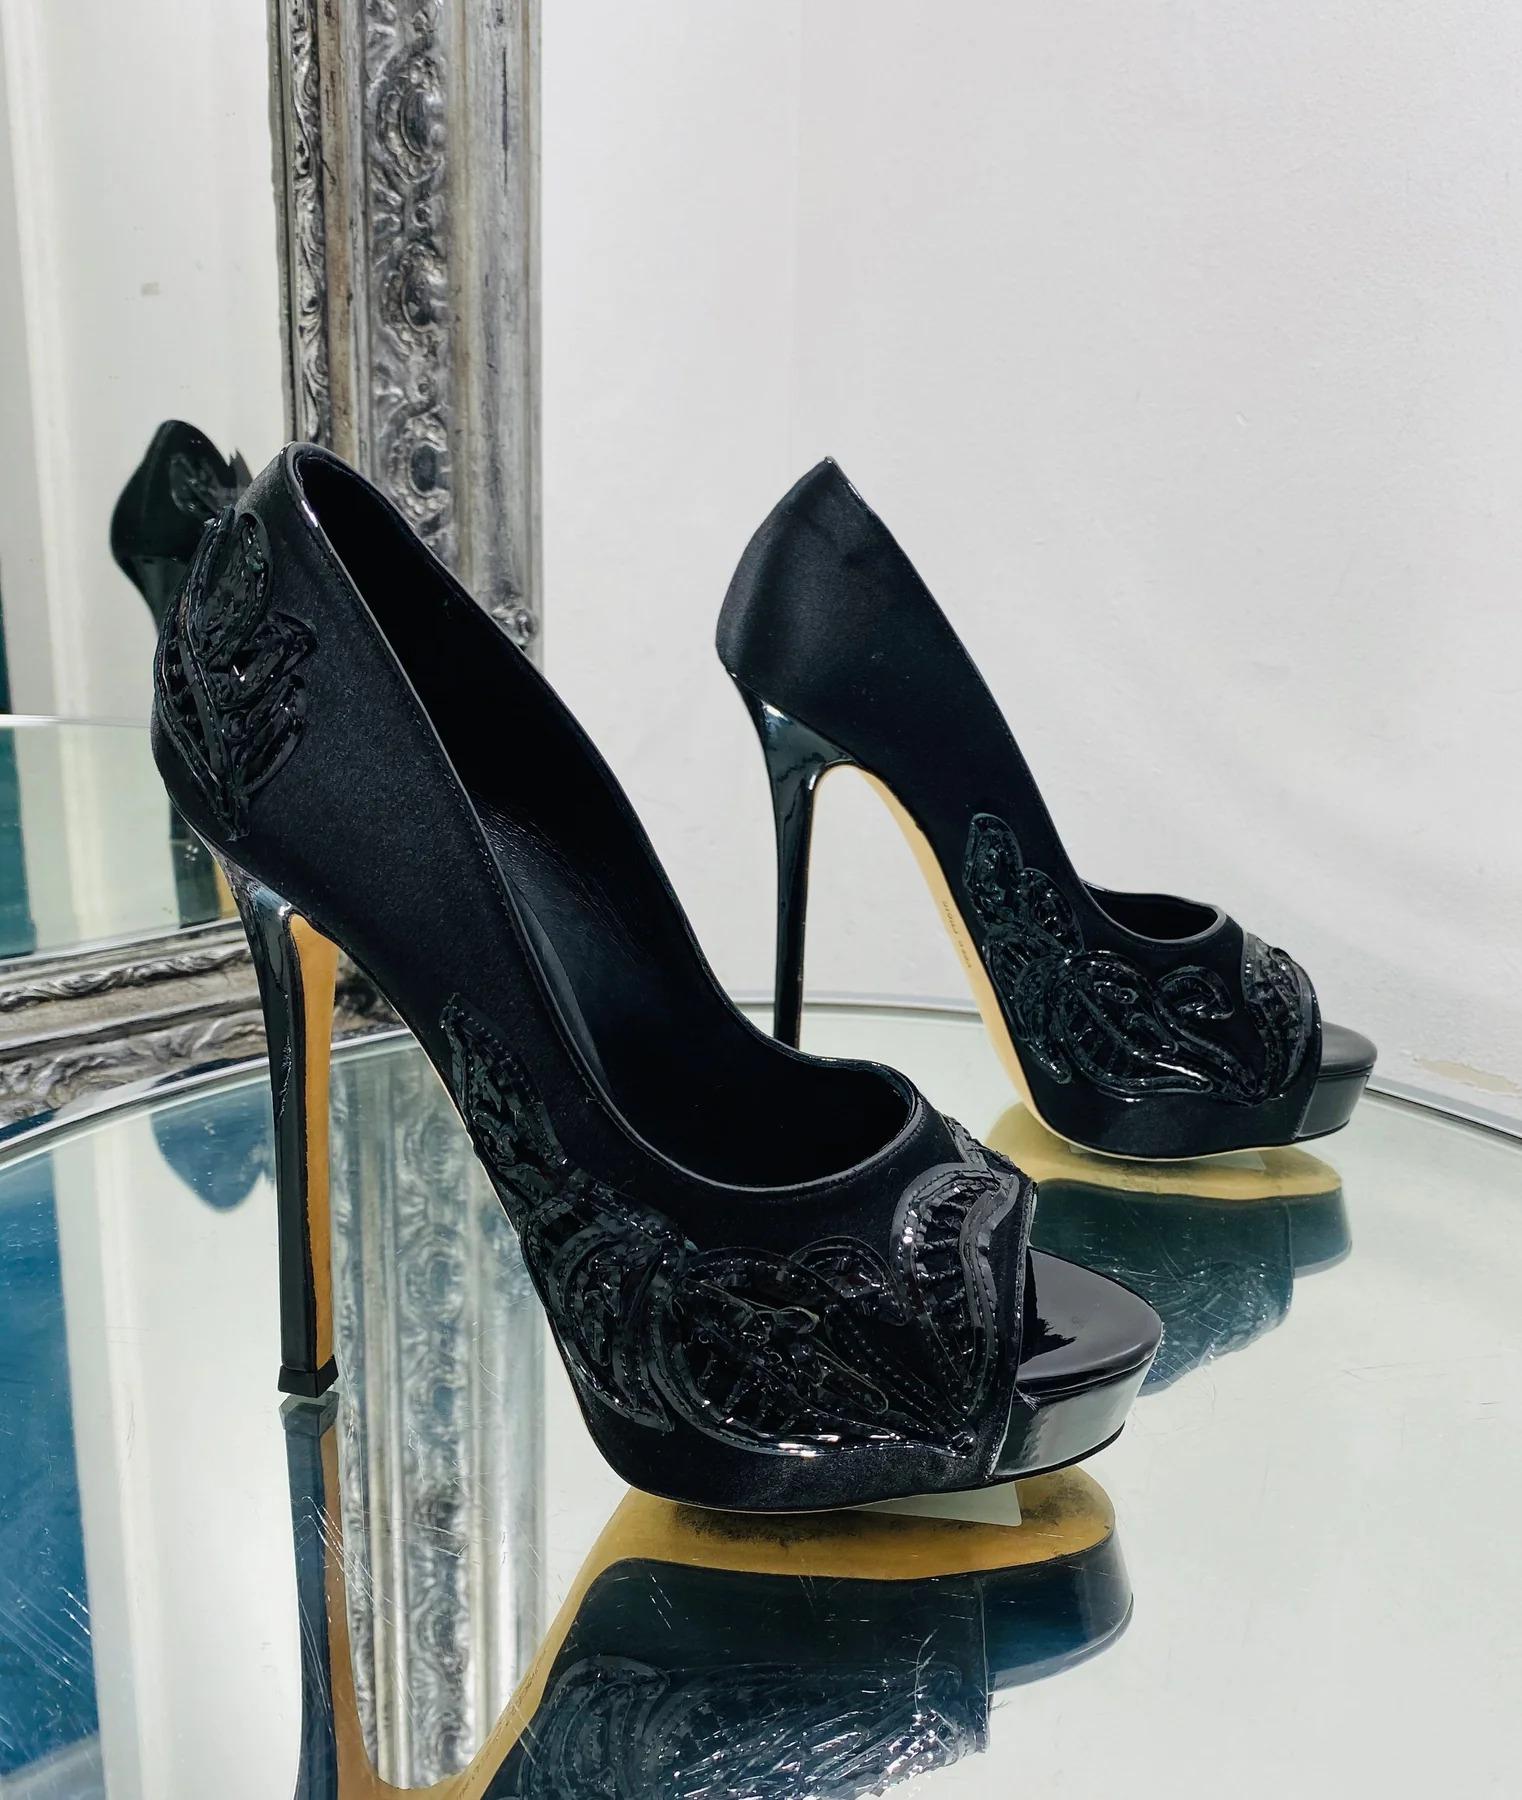 Ermanno Scervino Peep Toe Heels In Good Condition For Sale In London, GB